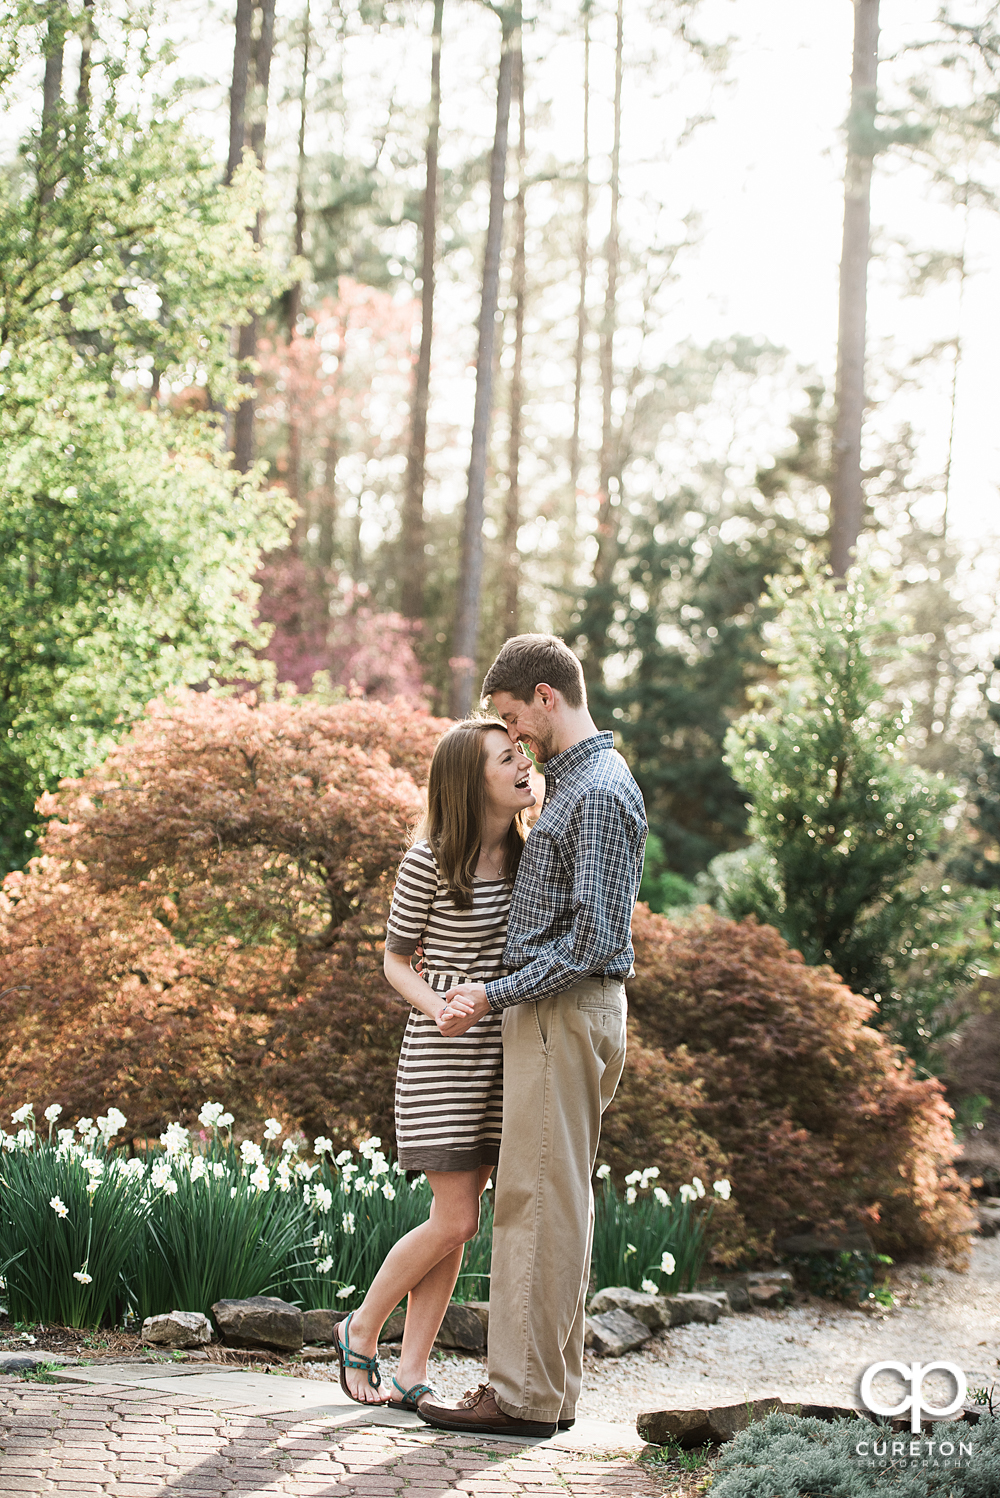 Engaged couple laughing during an engagement session at the Botanical Gardens in Clemson.